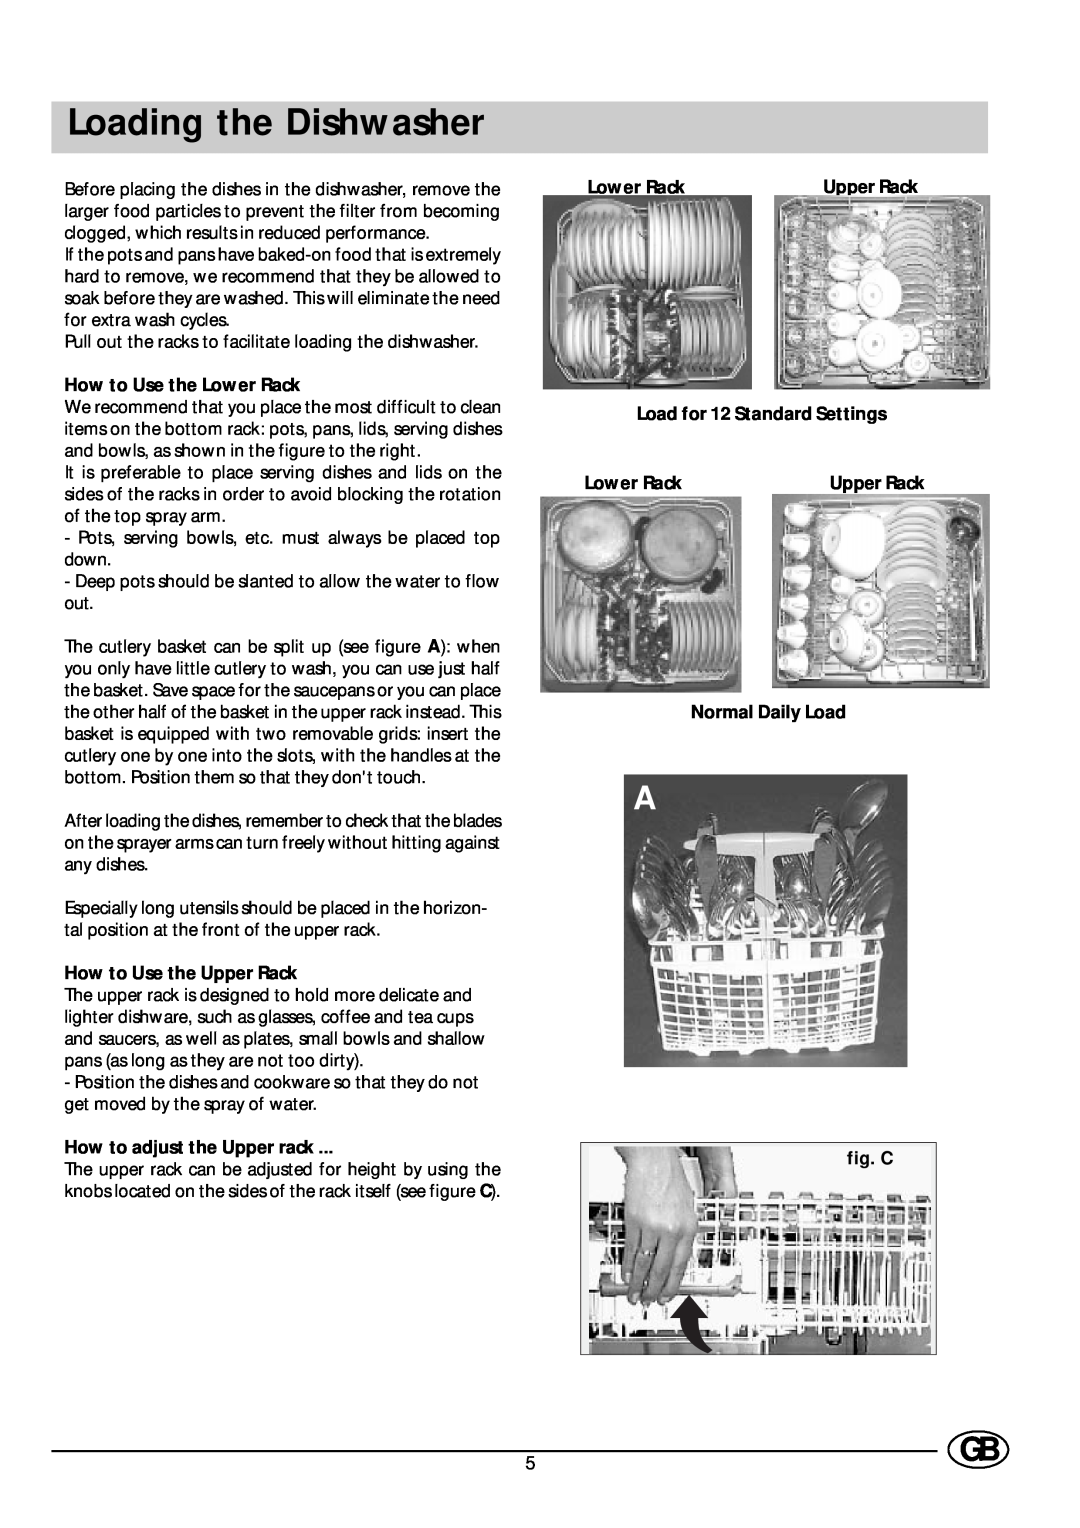 Indesit D 66 Loading the Dishwasher, How to Use the Lower Rack, How to Use the Upper Rack, How to adjust the Upper rack 